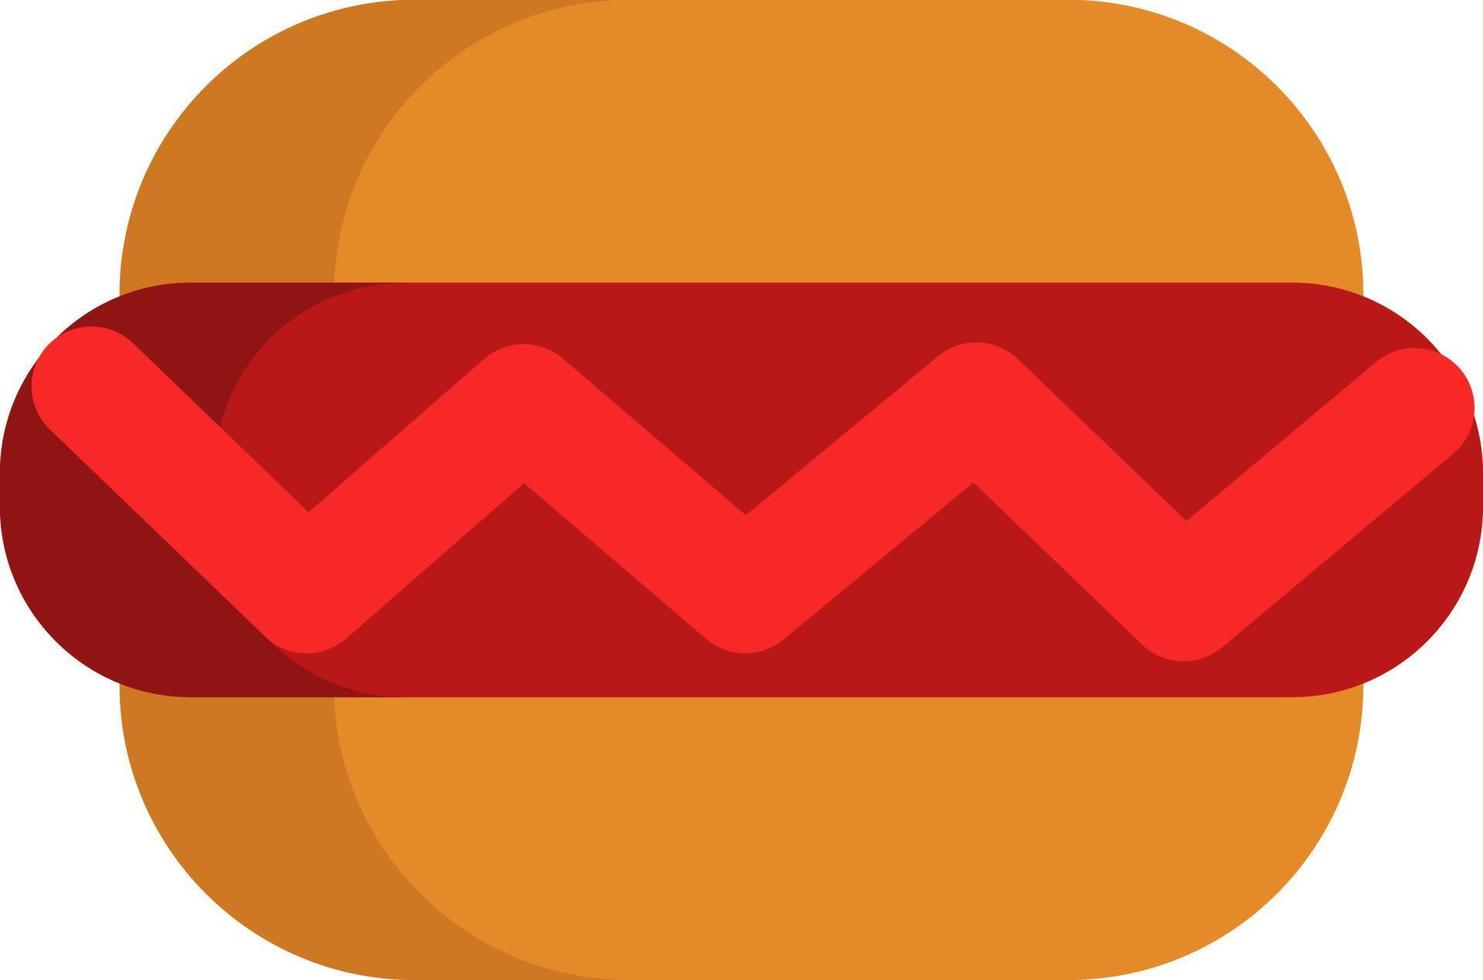 Hotdog with ketchup, illustration, vector, on a white background. vector